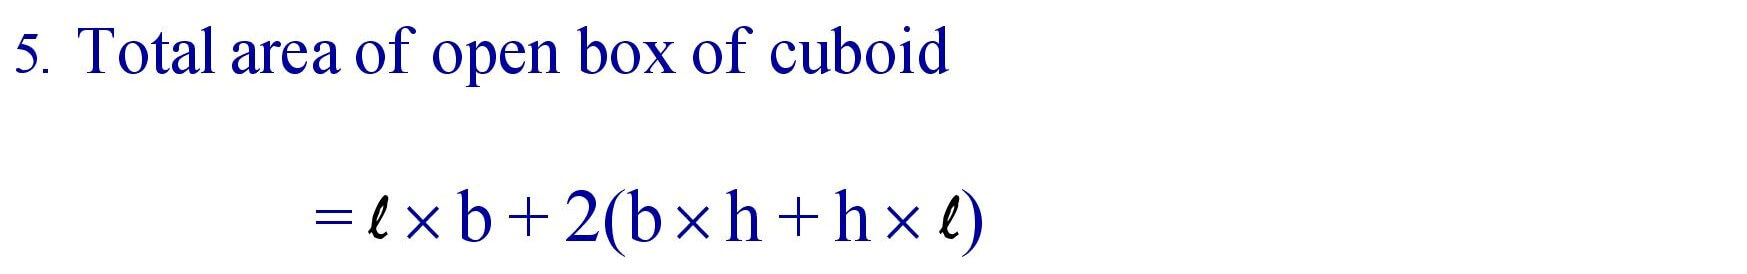 Total area of open box of cuboid